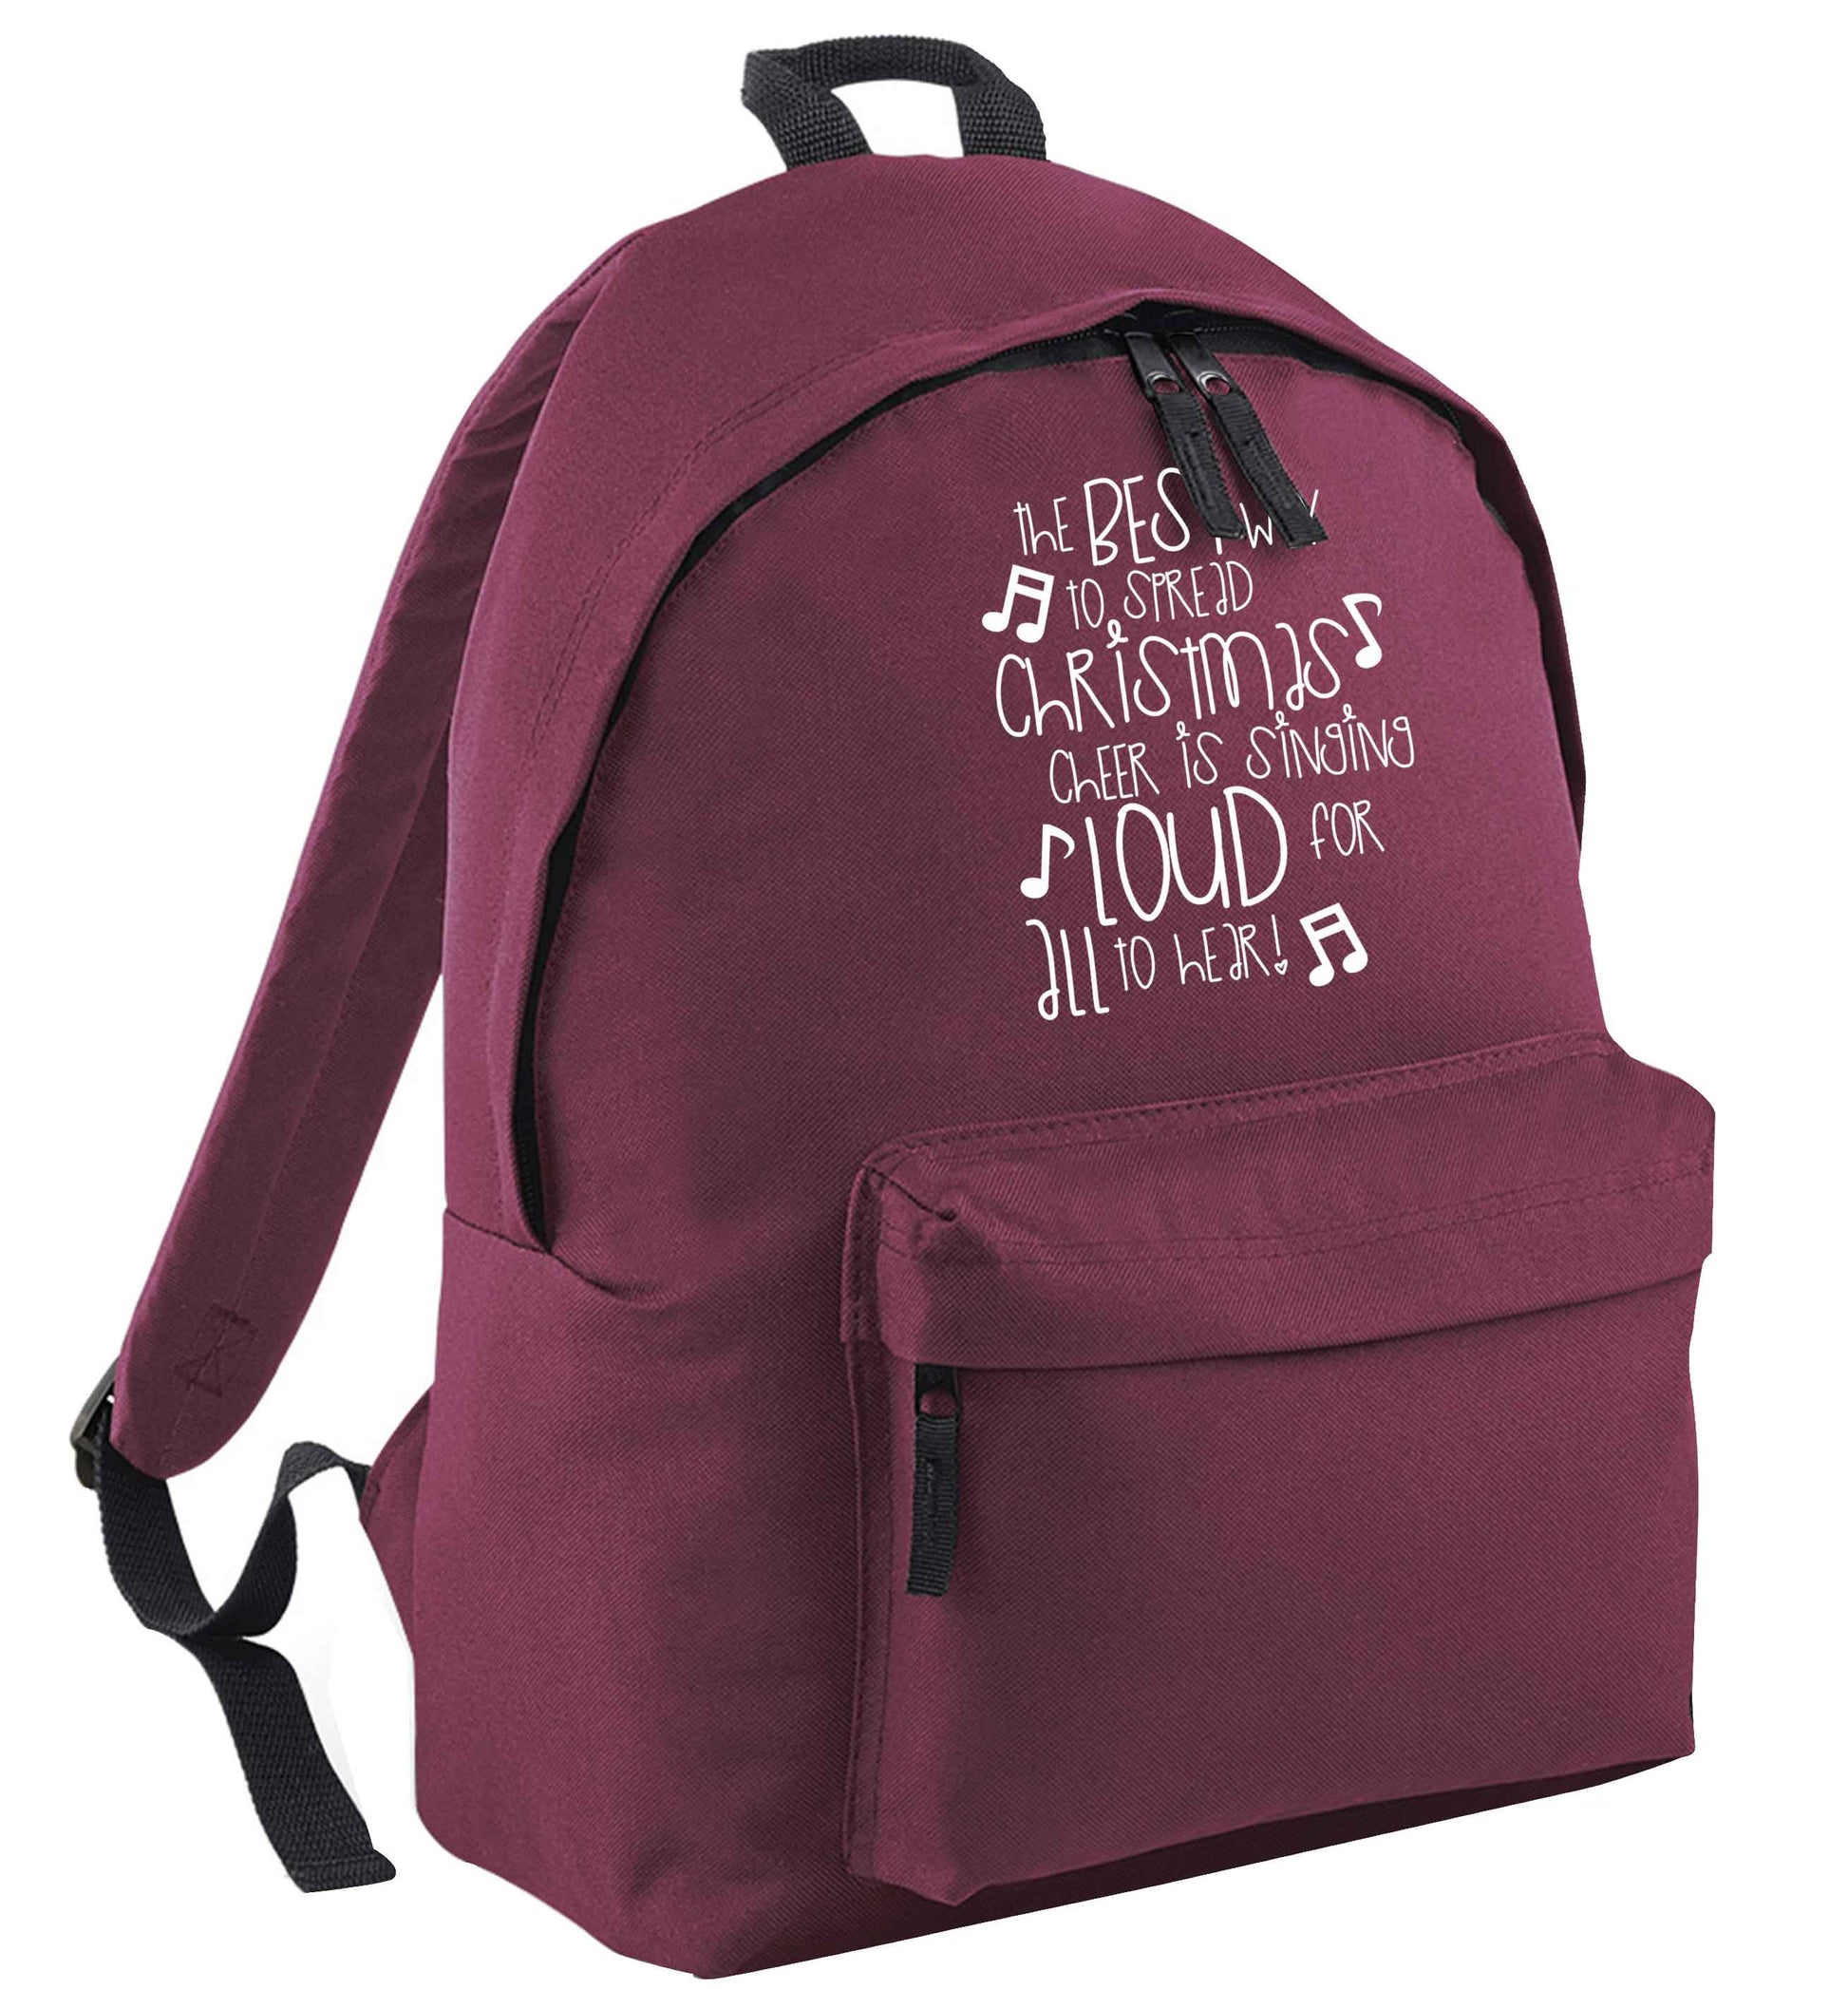 The best way to spread Christmas cheer is singing loud for all to hear maroon adults backpack